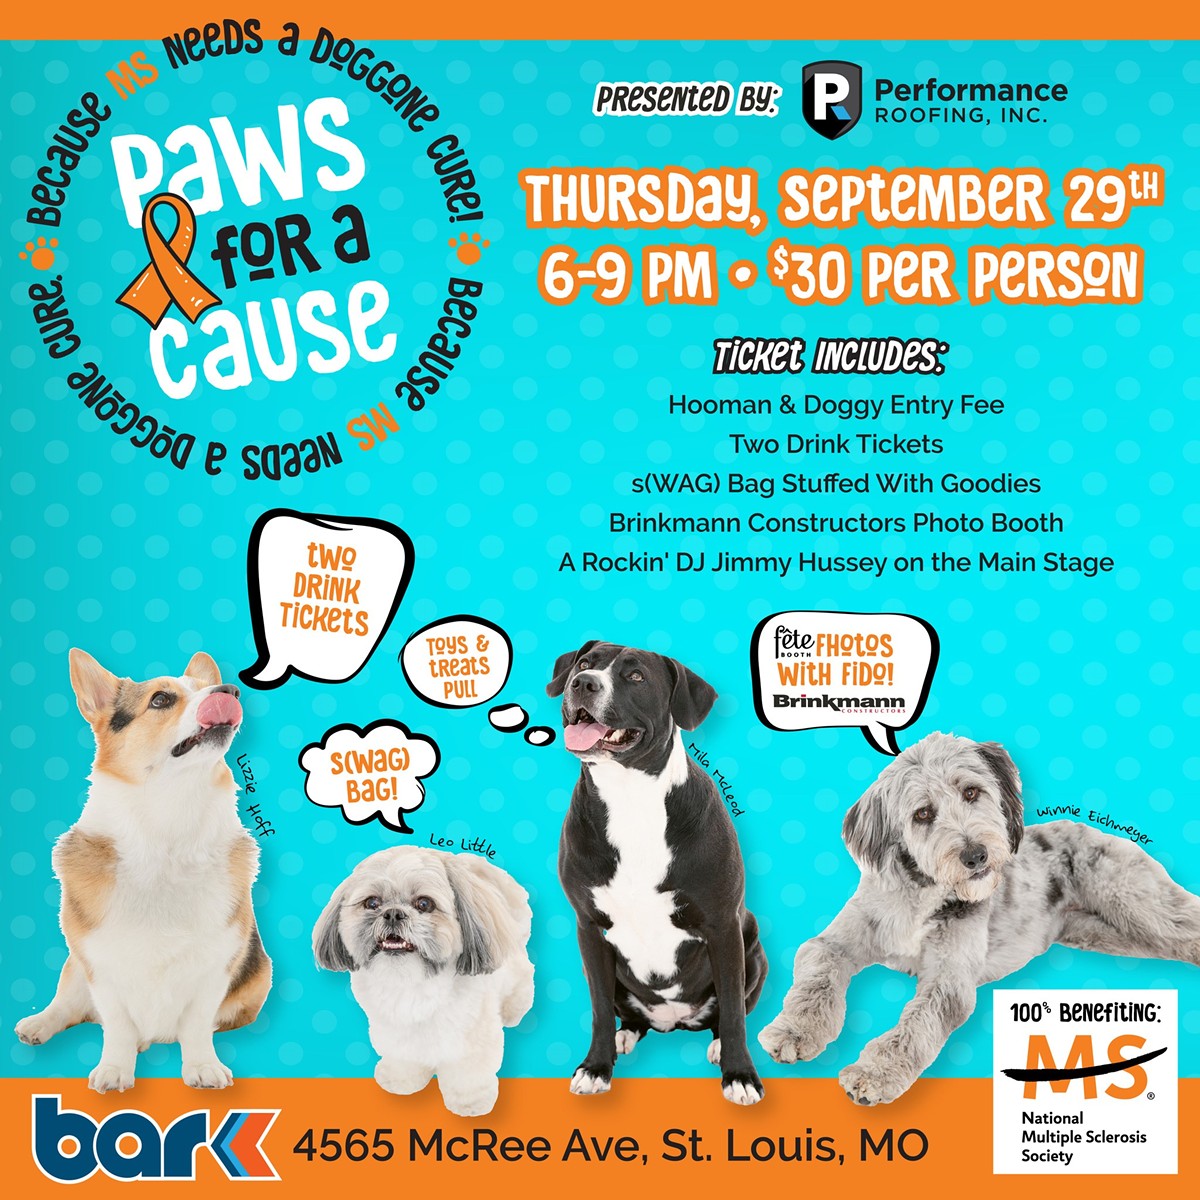 Paws for a Cause